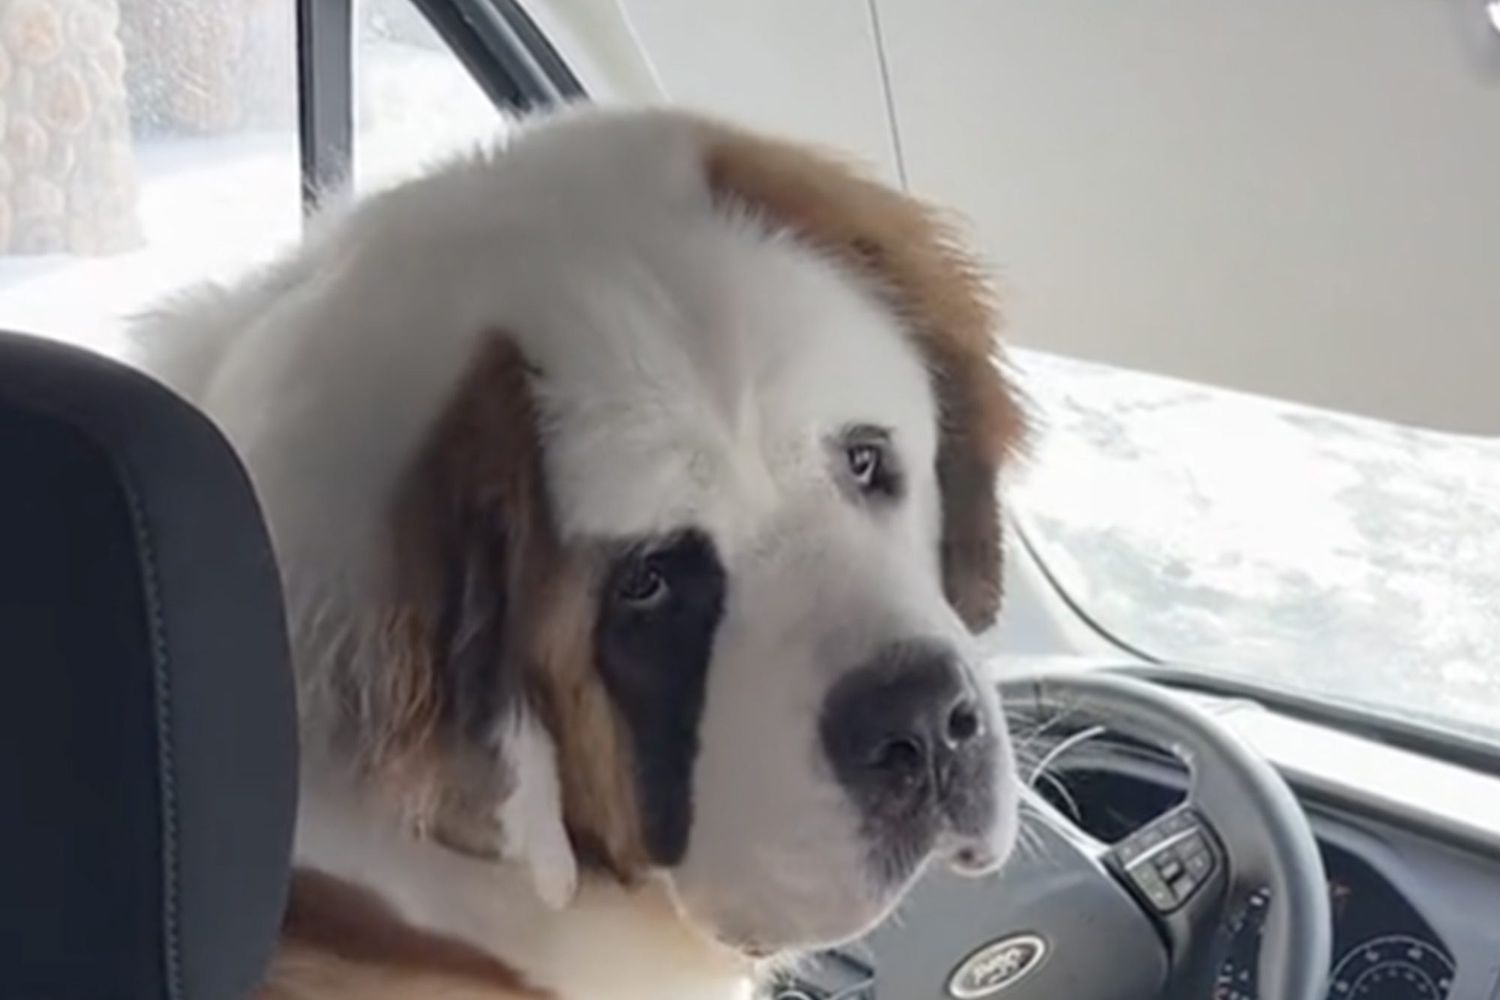 Watch This Large Dog's Bold, Adorable Attempt To Steal an Amazon Delivery Truck